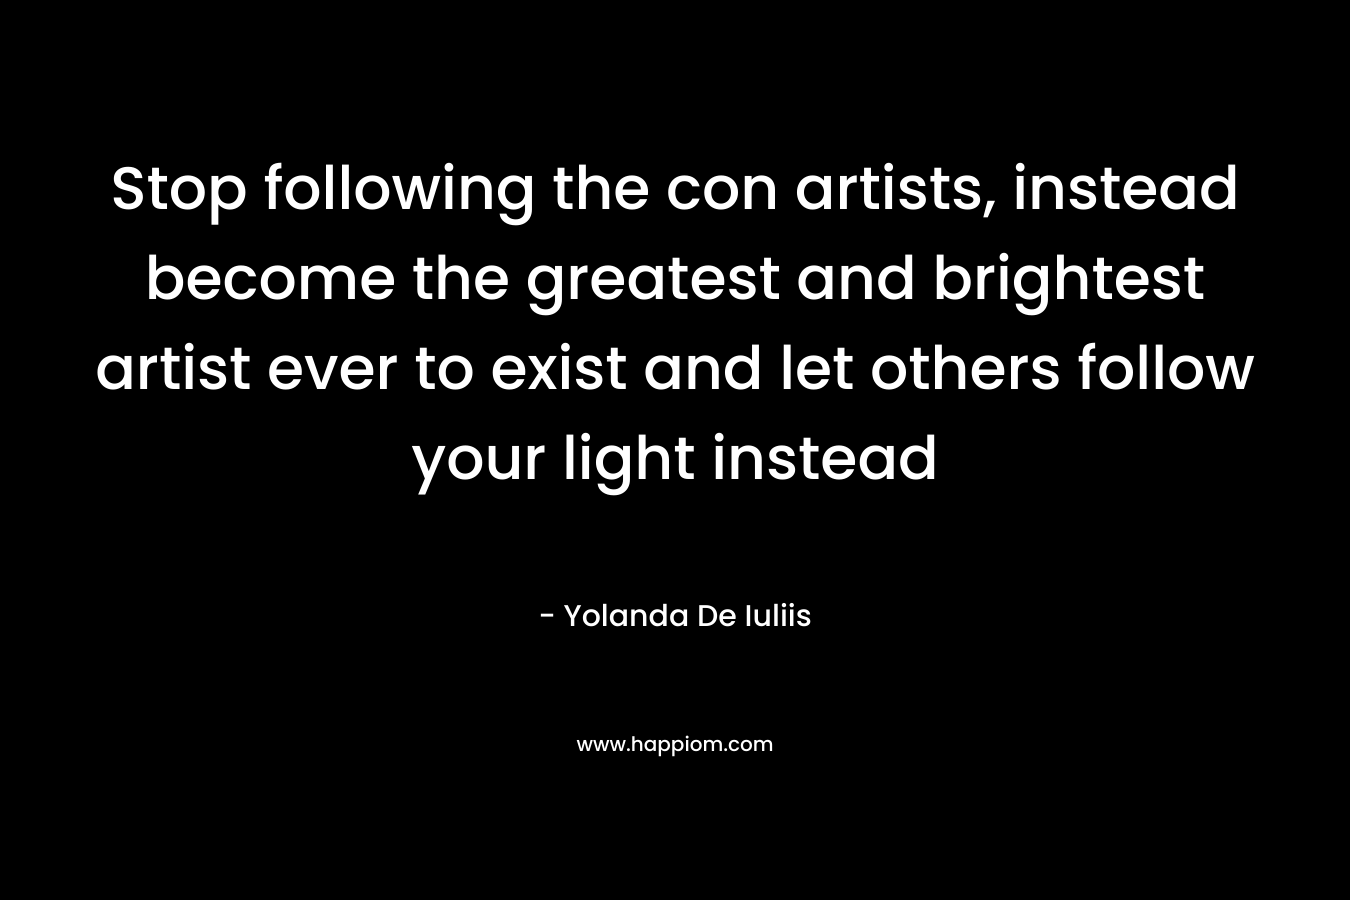 Stop following the con artists, instead become the greatest and brightest artist ever to exist and let others follow your light instead